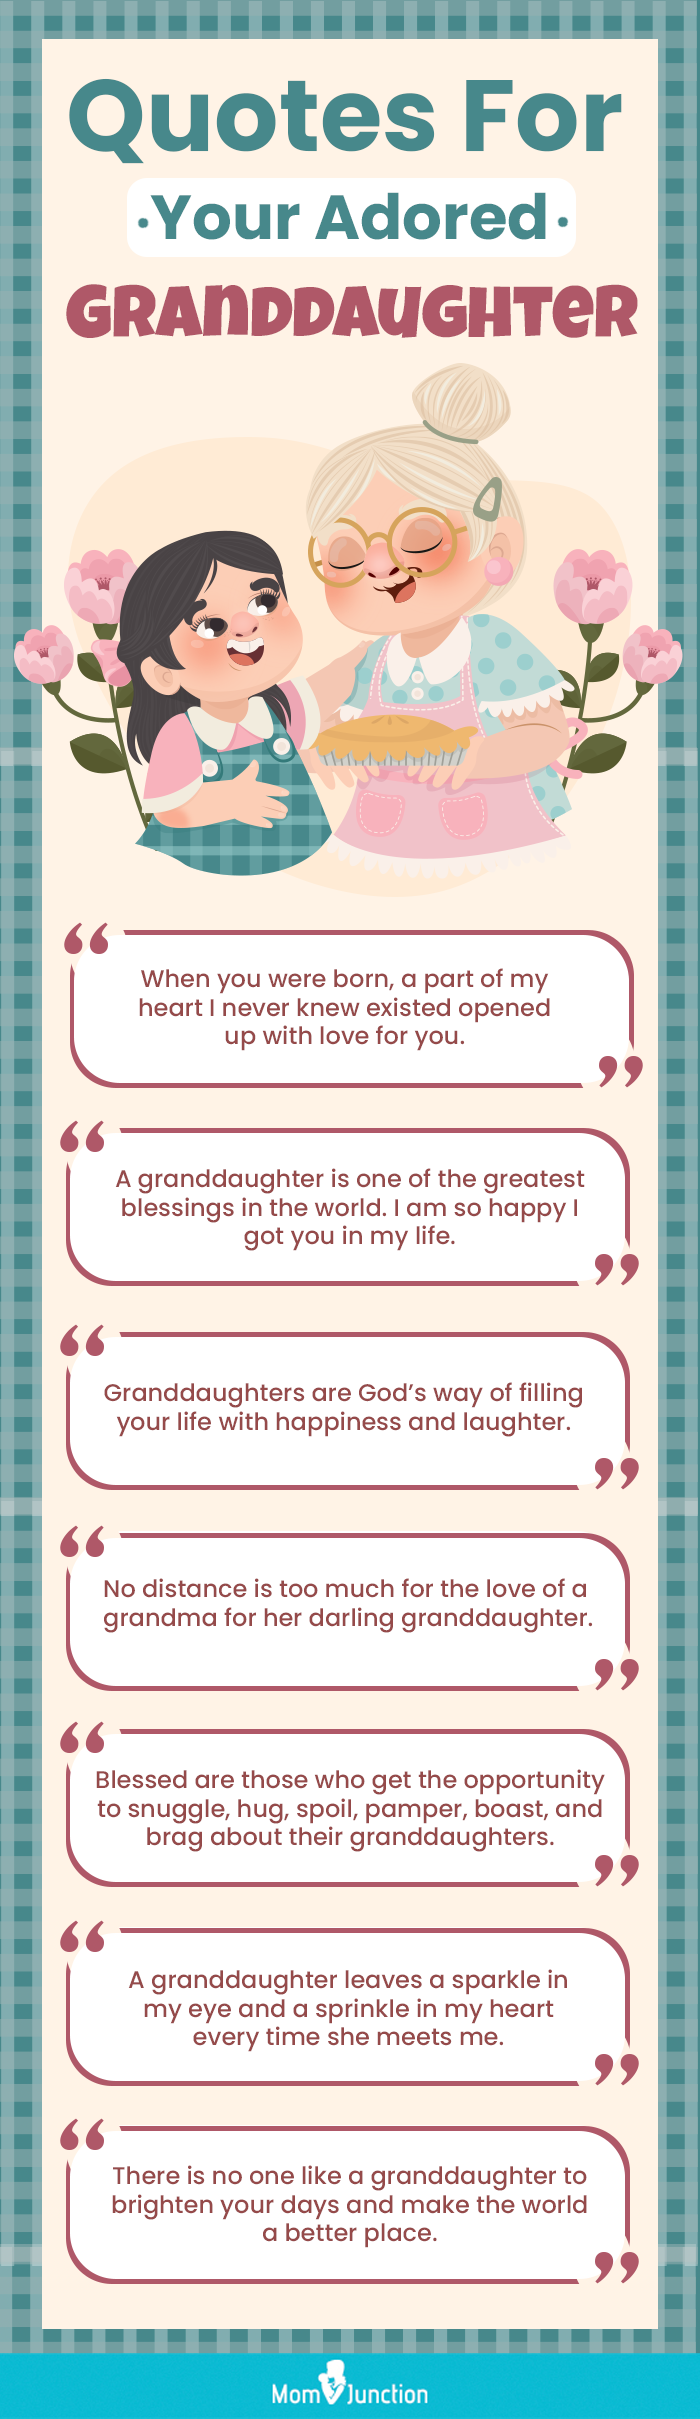 quotes for your adored granddaughter (infographic)